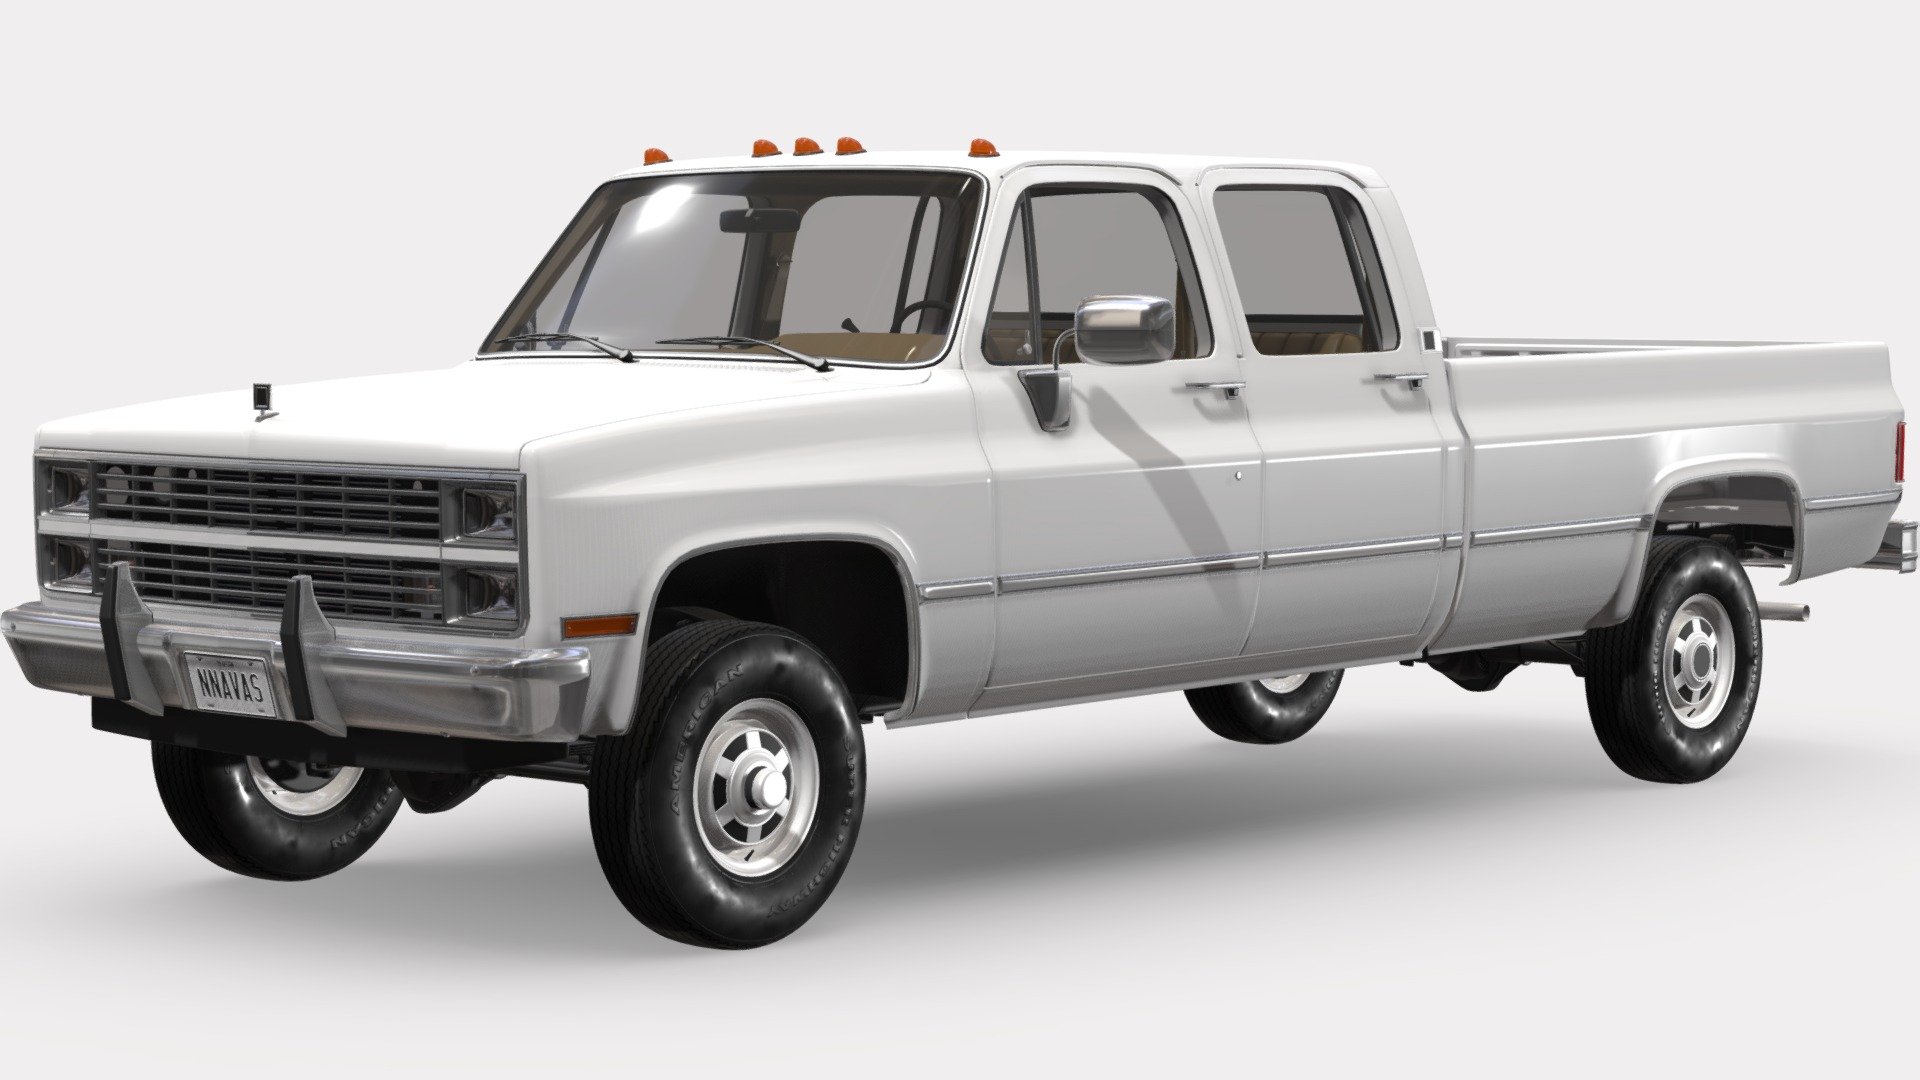 NN 3D store.

3D model of a vintage crew cab pickup truck.

The model was created with 3DS Max 2016 using the open subdivision modifier which has been left in the stack to adjust the level of detail.

FBX and OBJ files have been included in separated HI and LO subdivision versions.

Renderer: V Ray.

MATERIALS AND TEXTURES:

The model has diffuse, bump and specular maps plus materials. The pickup's body, cabin, tires and brakes have textures.

All materials and textures are included and mapped in all files, settings might have to be adjusted depending on the software you are using. 

Textures are in JPG format with 2048x2048, 1024x1024 and 512x512 resolution 3d model